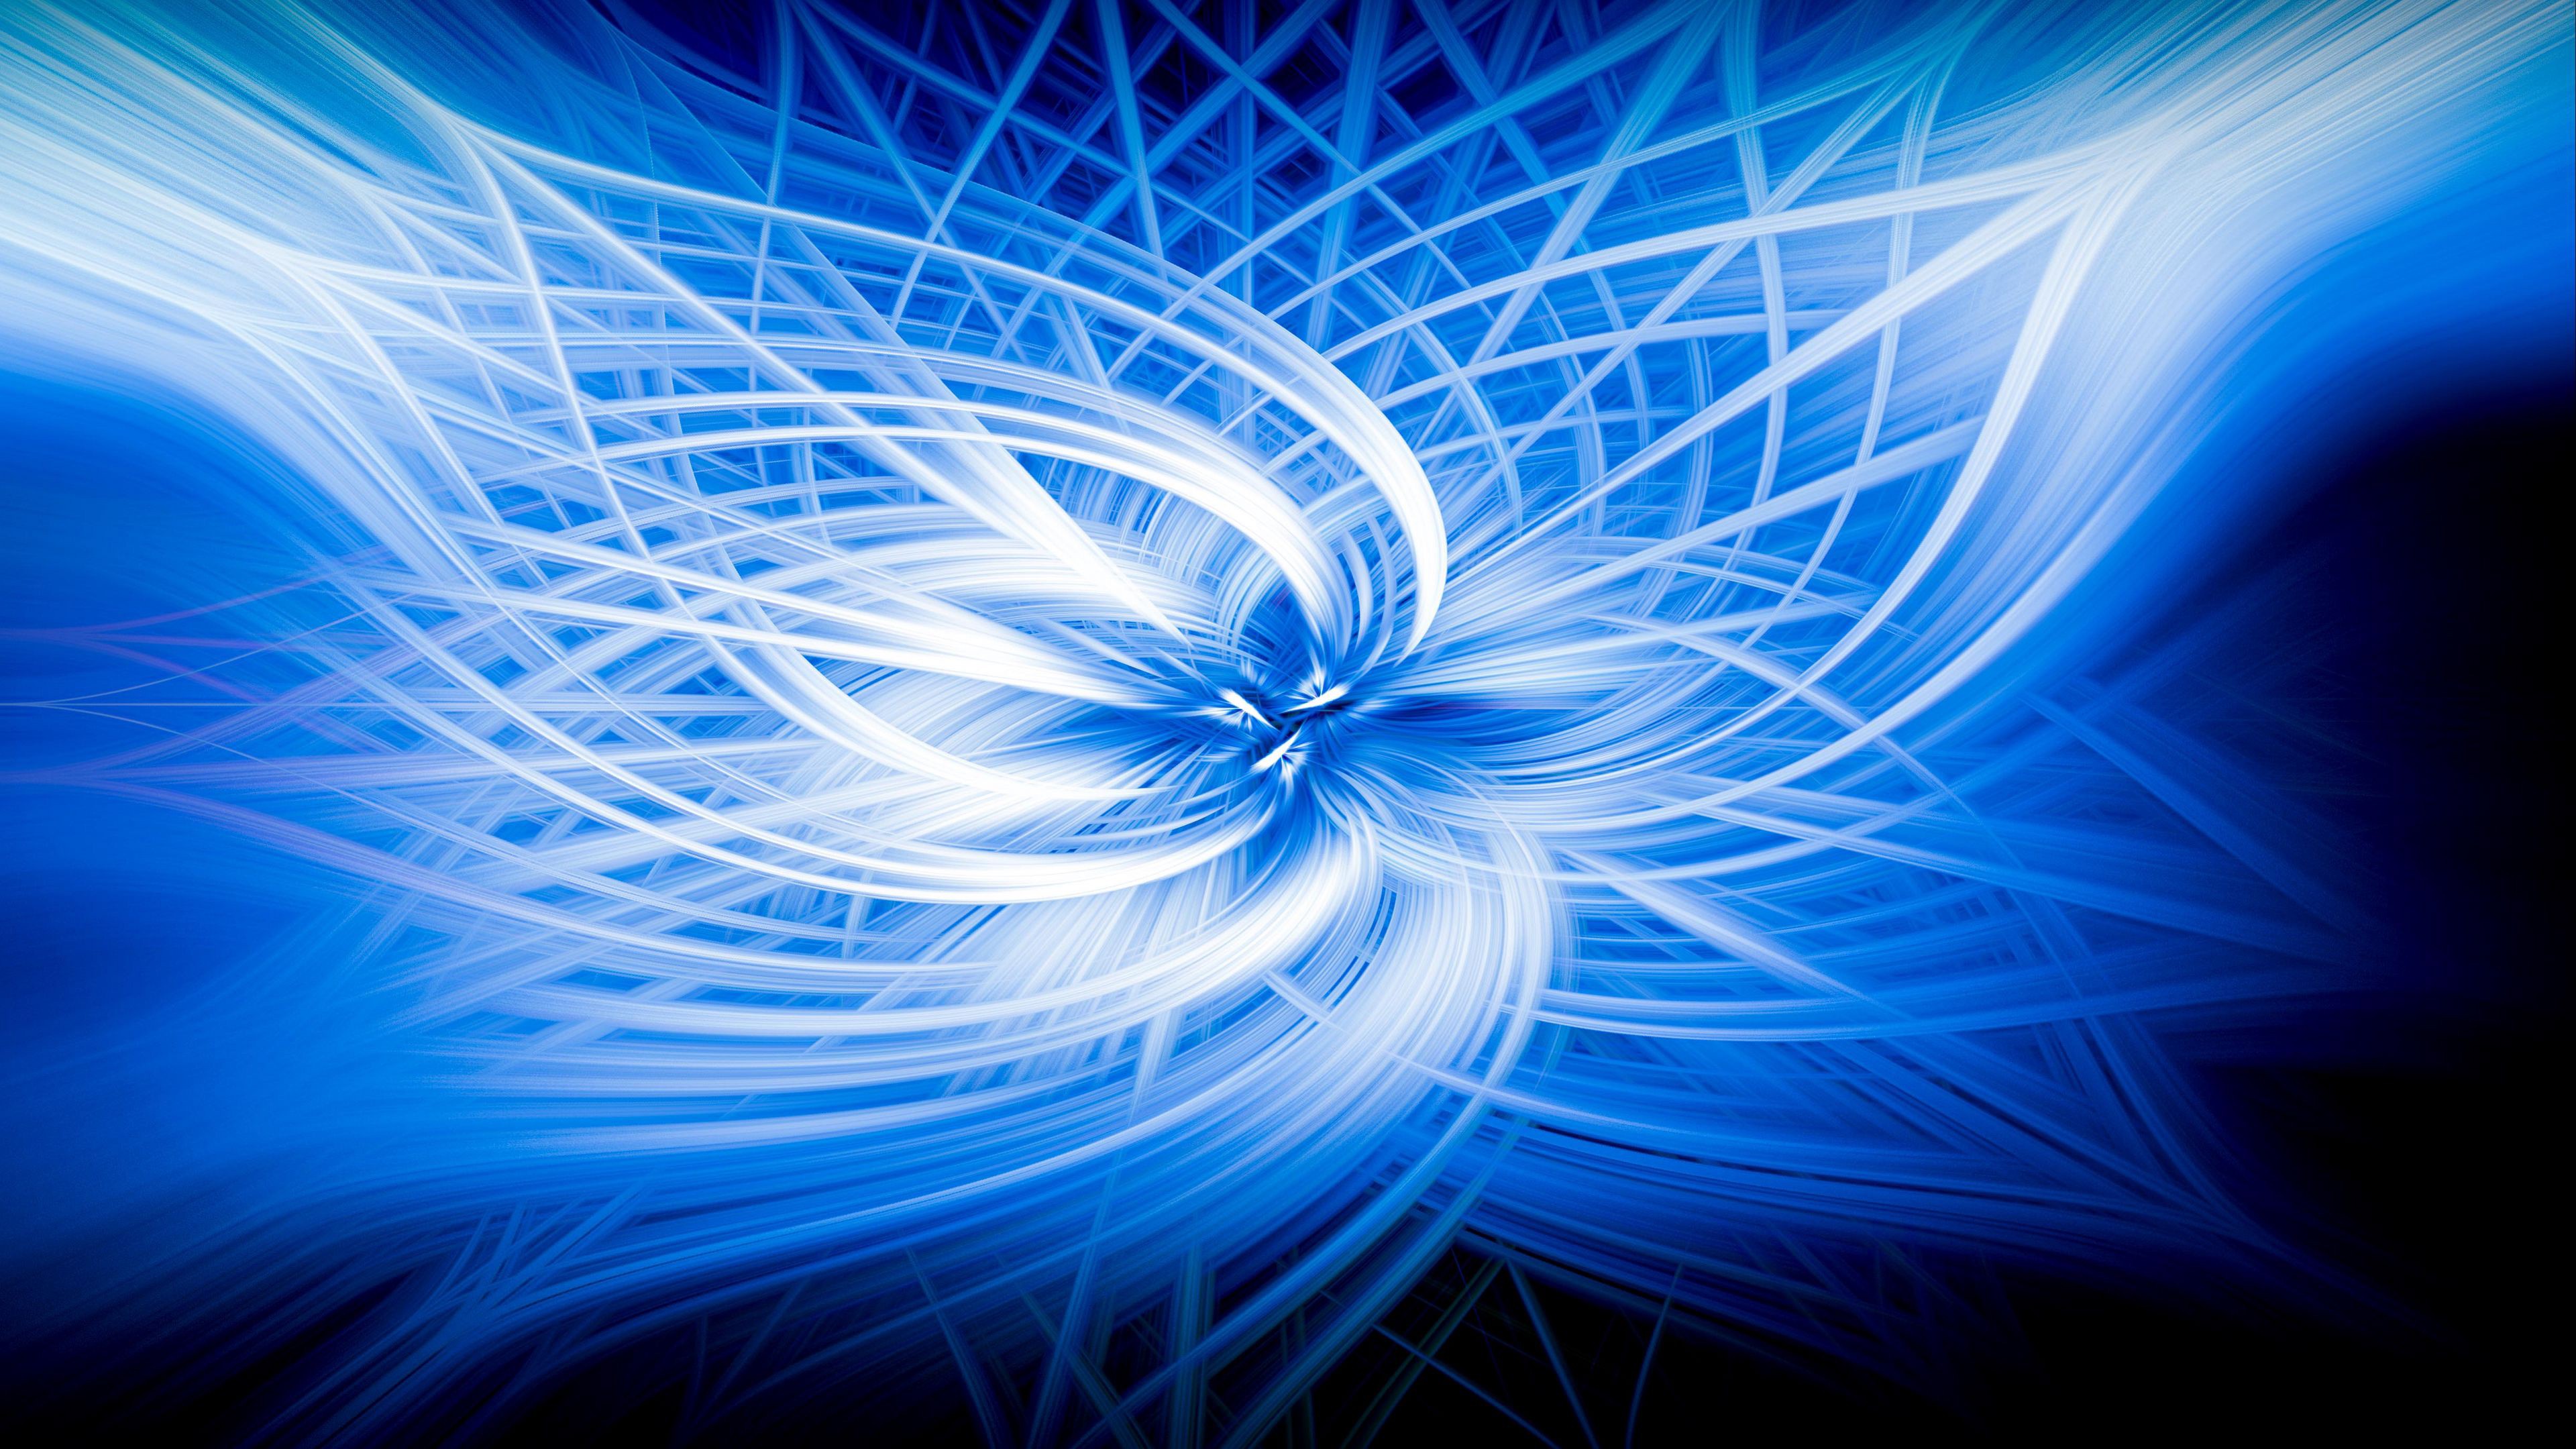 Neon blue abstract flower on a black background Desktop wallpapers 1280x1024